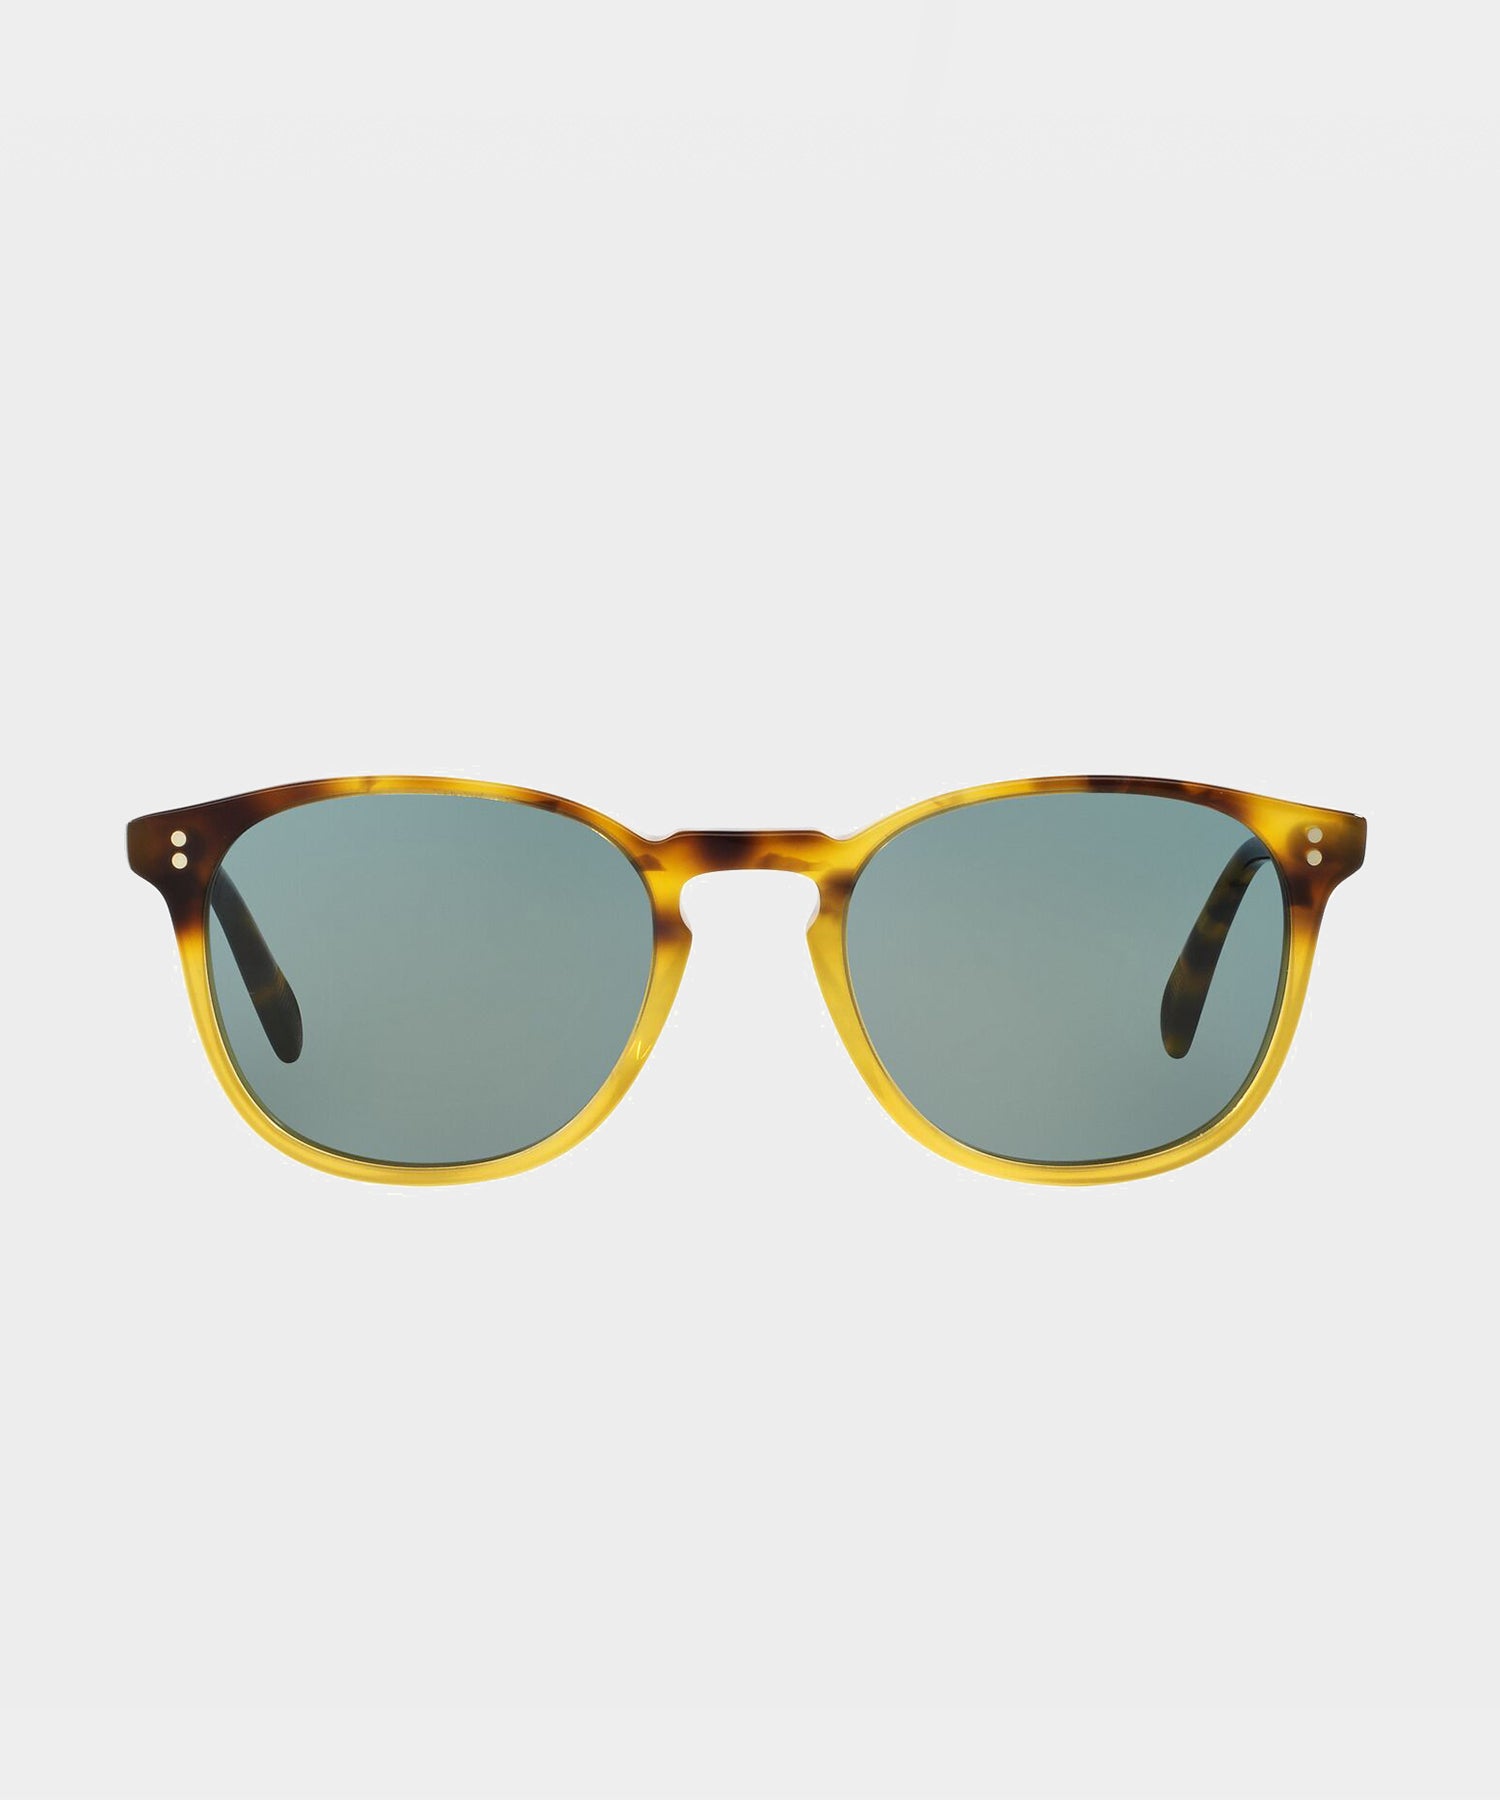 Oliver Peoples Finely Sunglasses in Vintage Brown Tortoise